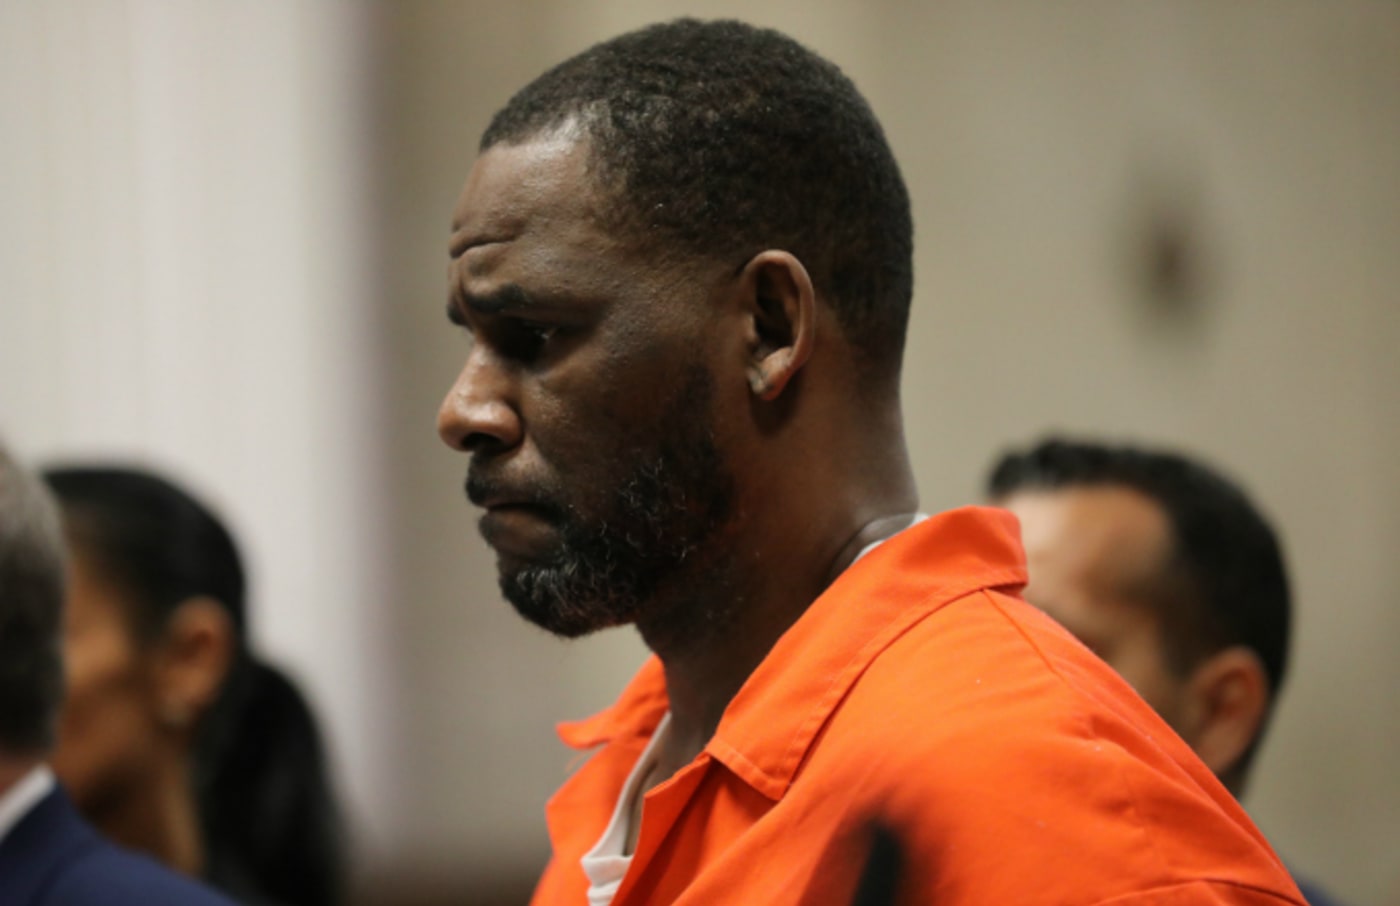 Singer R. Kelly appears during a hearing at the Leighton Criminal Courthouse